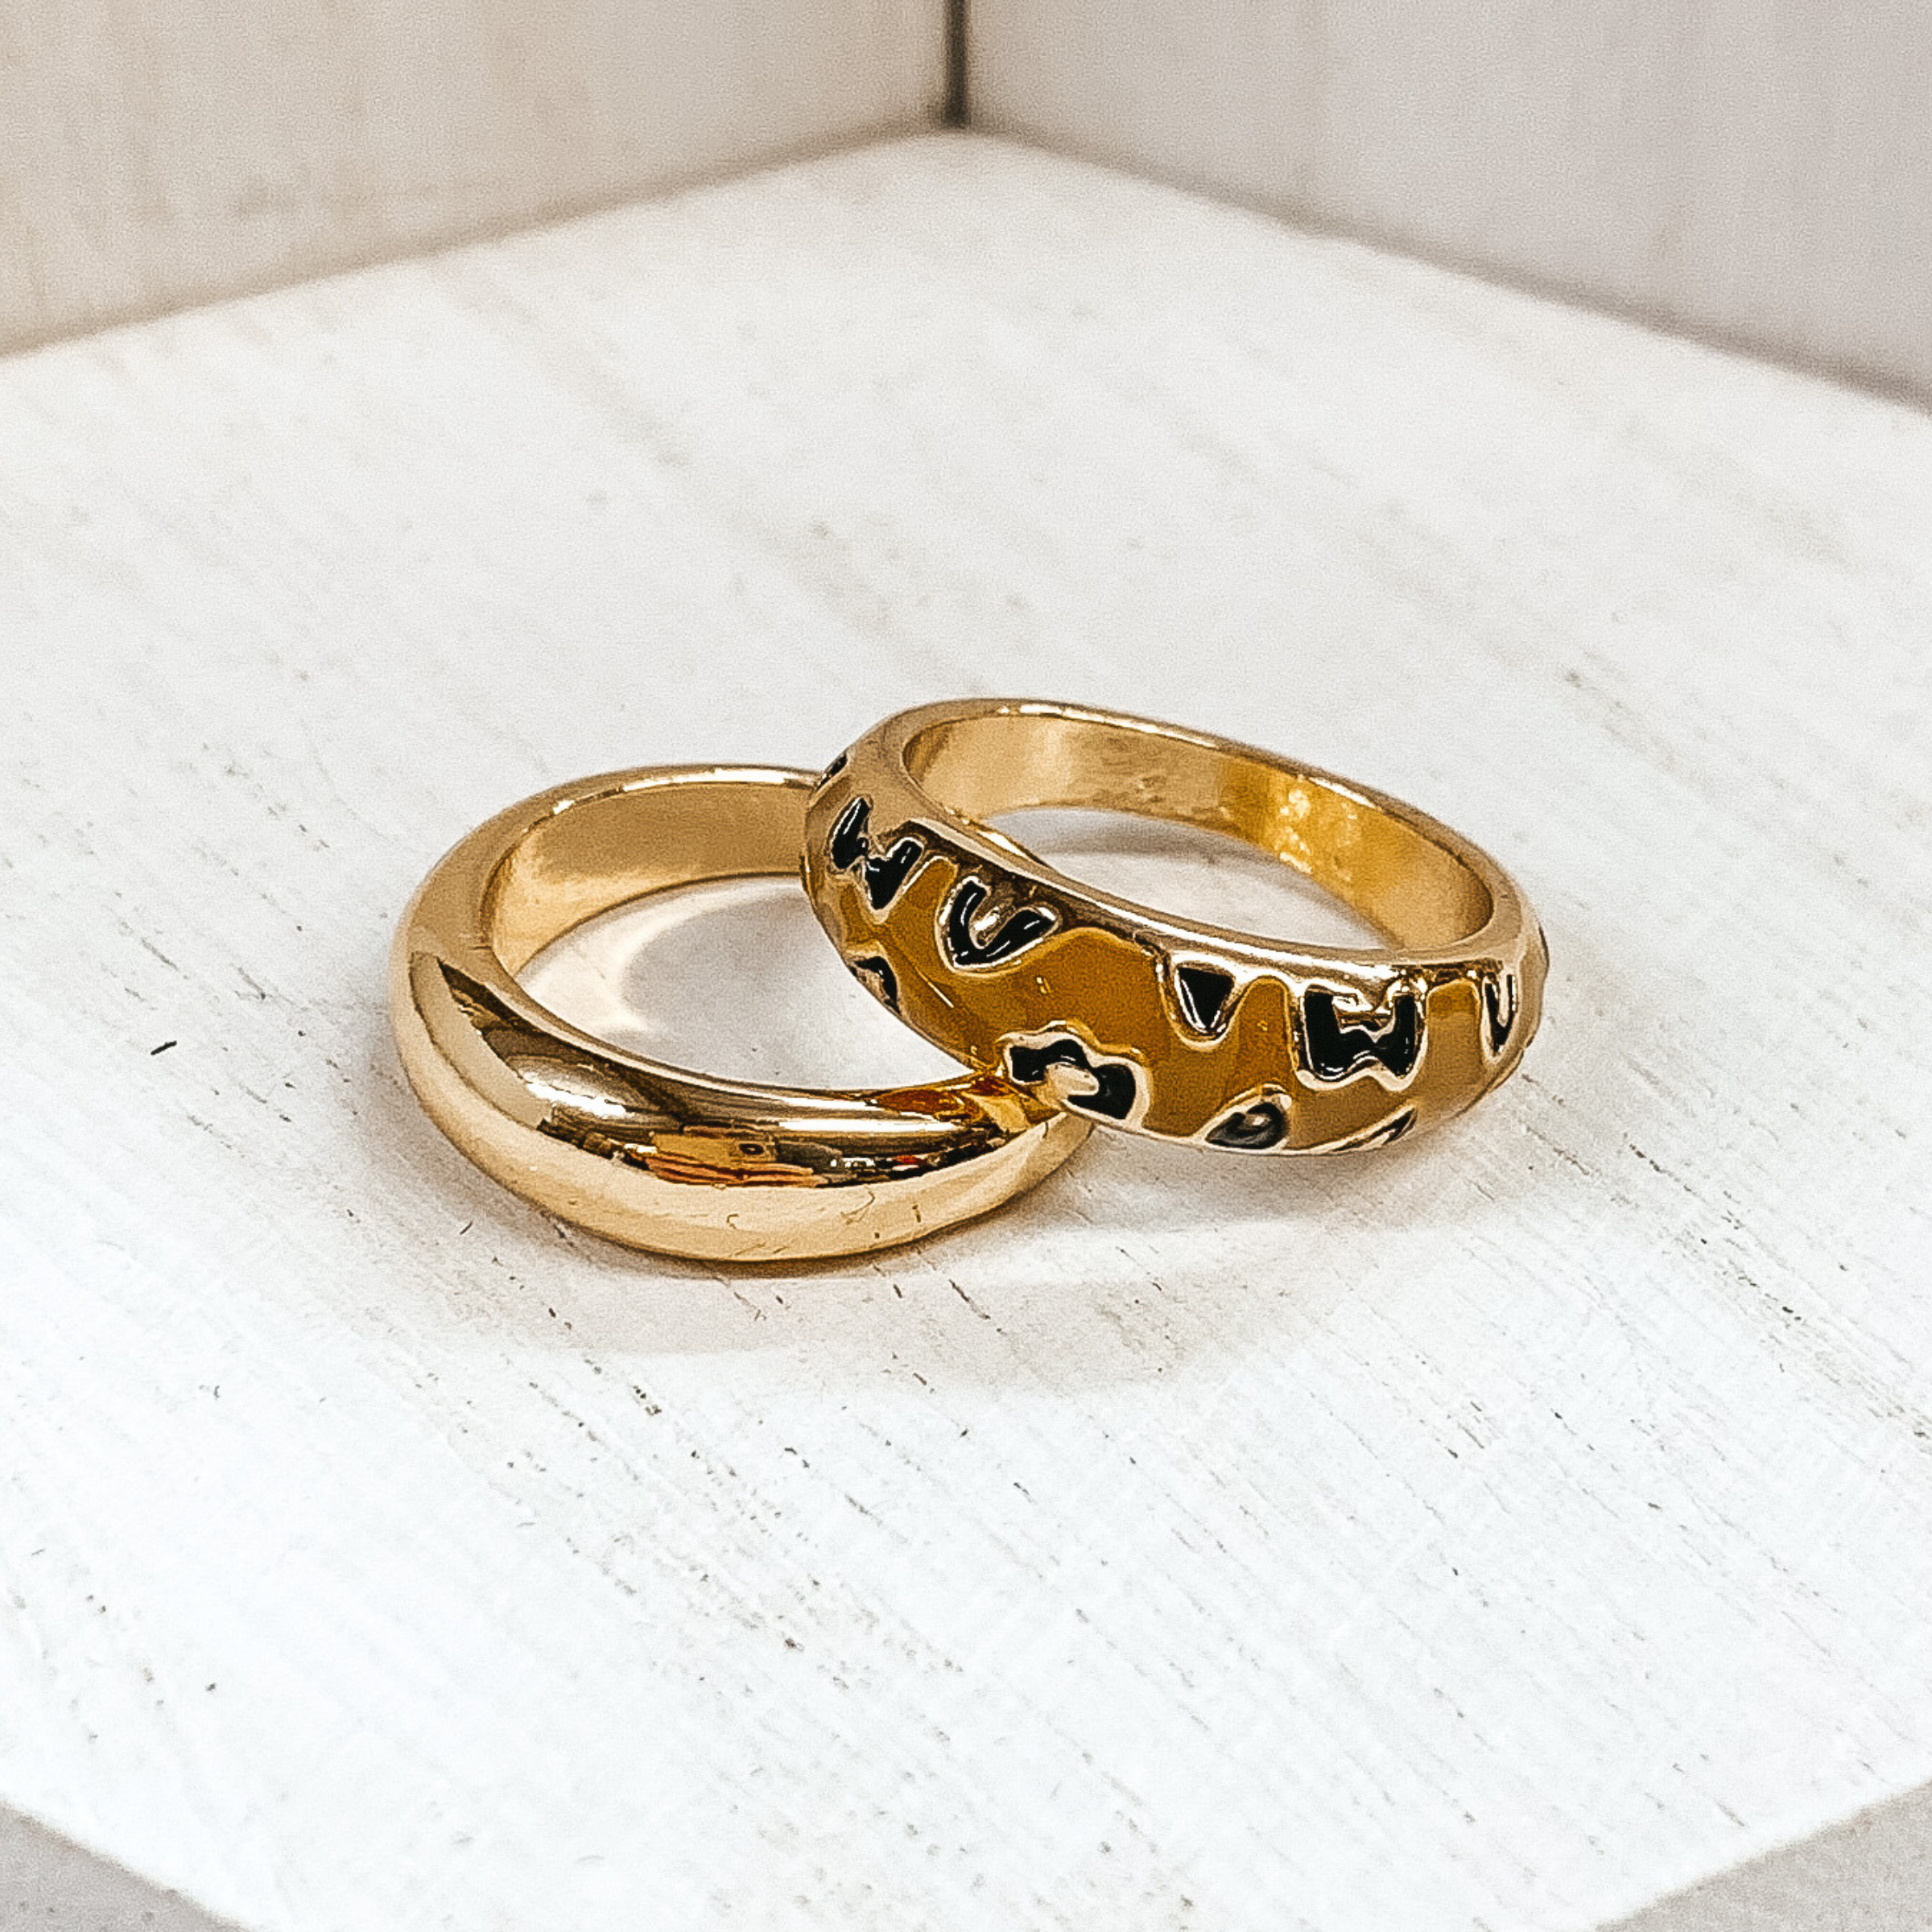 Set of two thick, gold rings. One ring is plain, while the secong ring has a tan colored part with leopard print. These rings are pictured on a white background. 